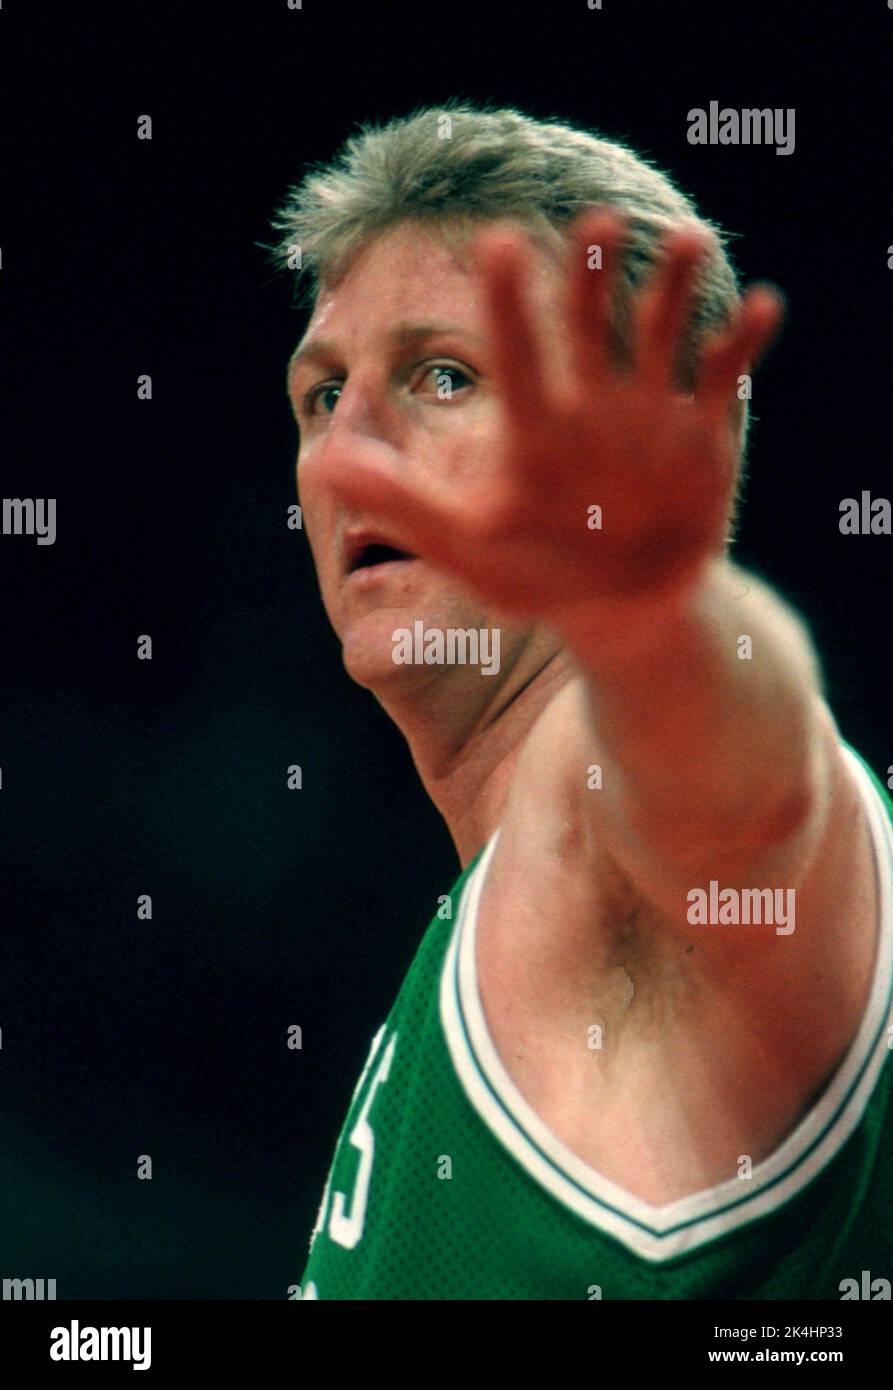 Boston Celtics forward Larry Bird is shown during a game in Chicago in the 1980s. Stock Photo